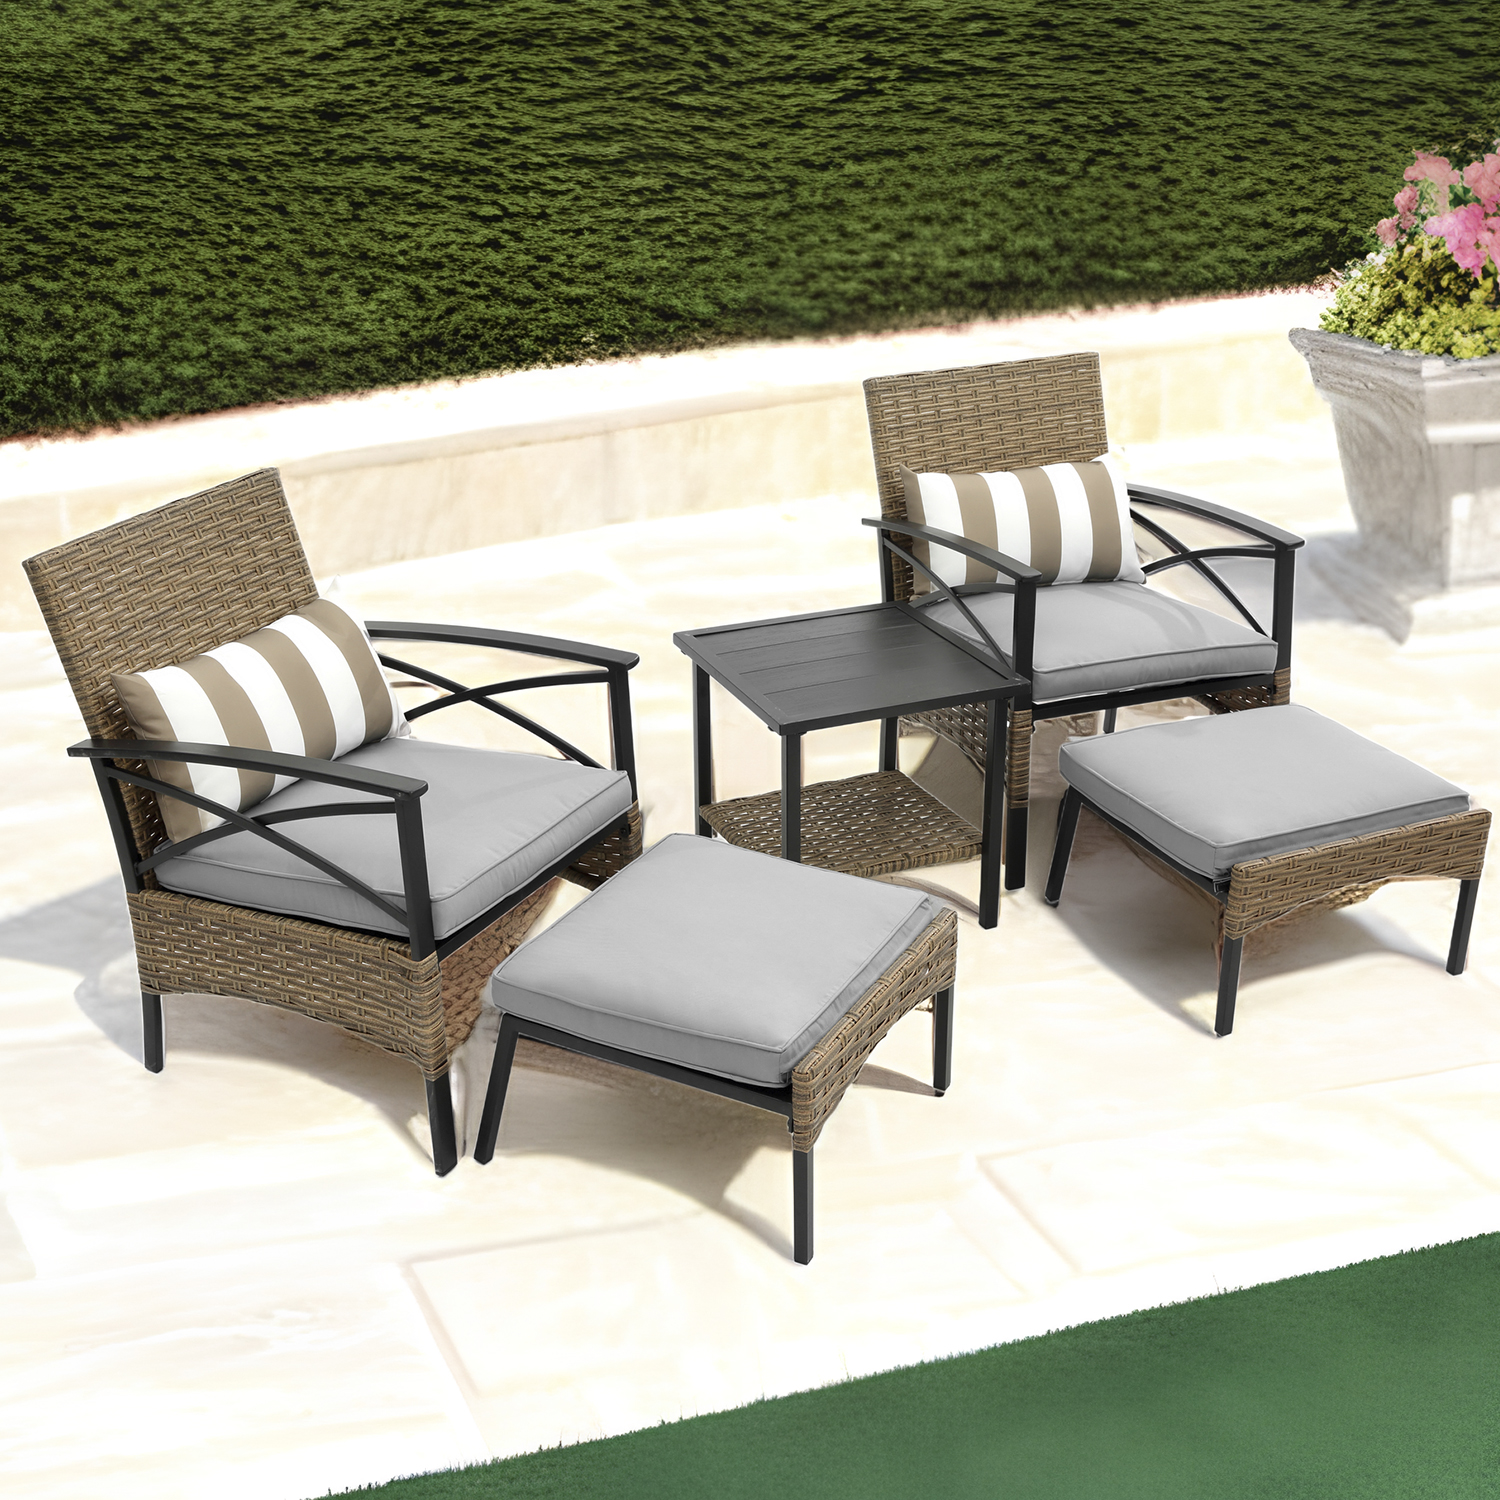 Outdoor Patio Furniture Sets, 5 Piece Wicker Patio Bar Set, 2pcs Arm Chairs, 2 Footstool&Coffee Table, Outdoor Conversation Sets for Backyard Lawn Poolside Garden, Gray Cushion - image 2 of 10